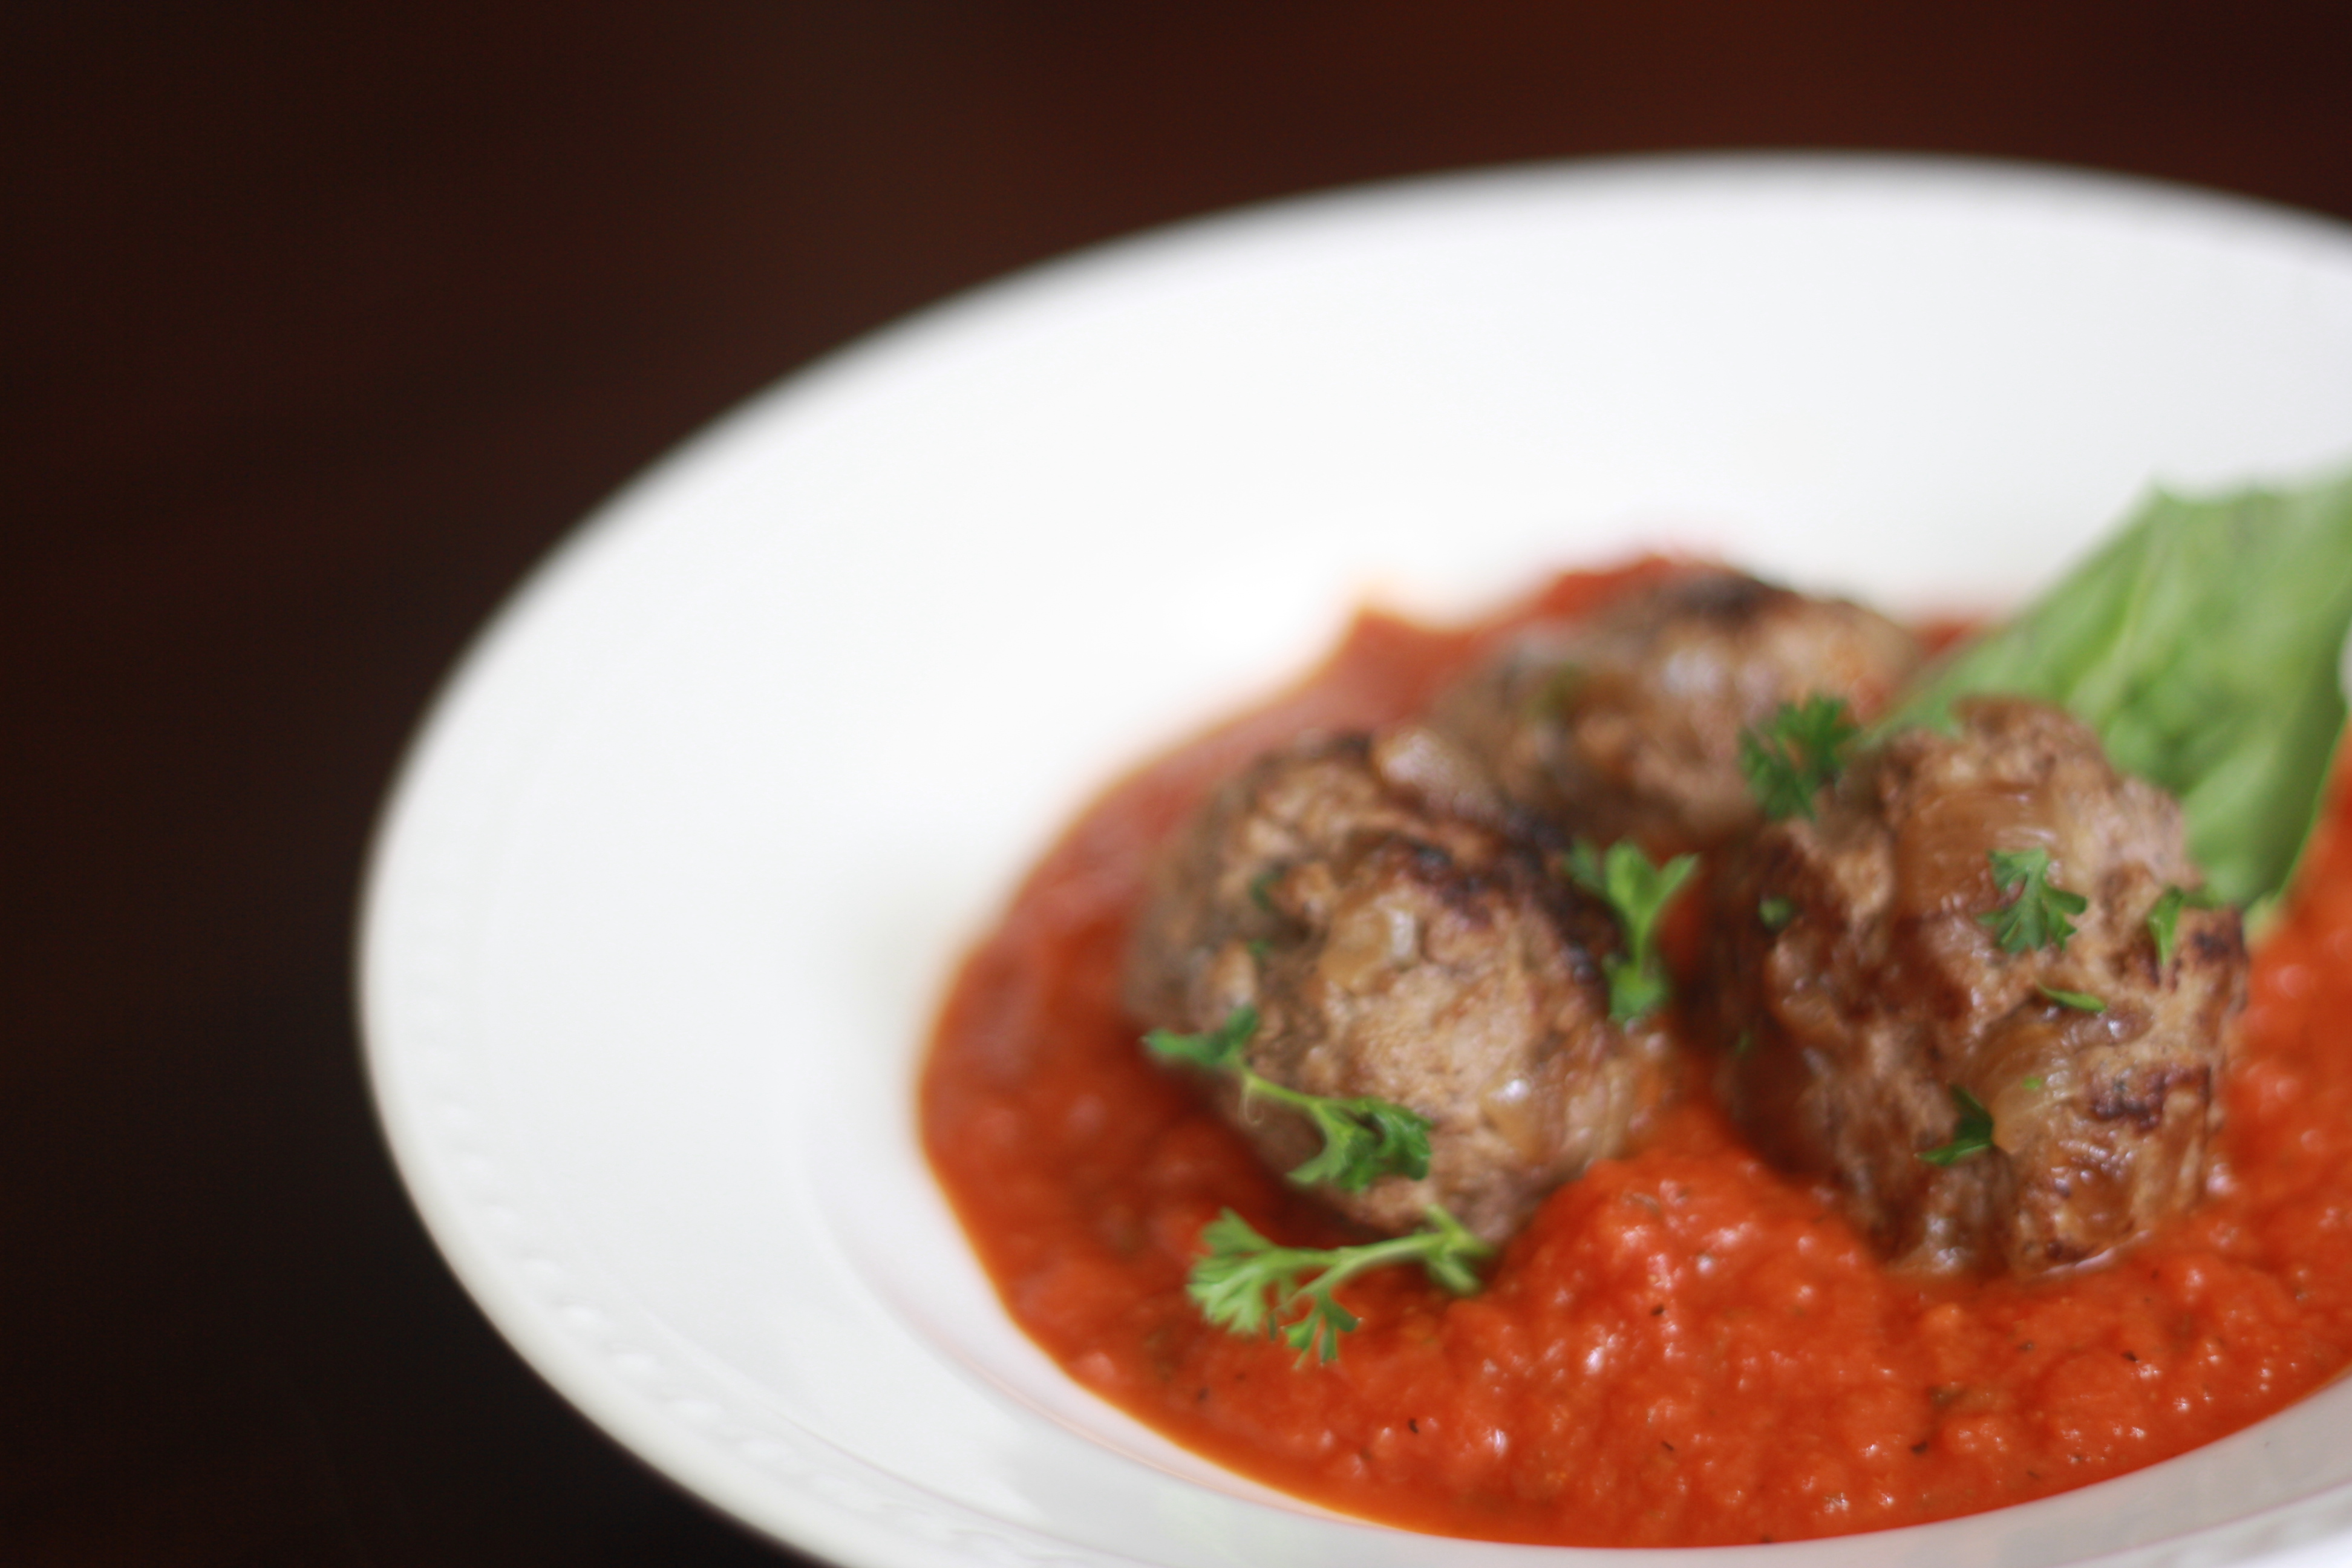 Classic Meatballs and Spicy Marinara (Low Carb, Paleo, HCG P2)